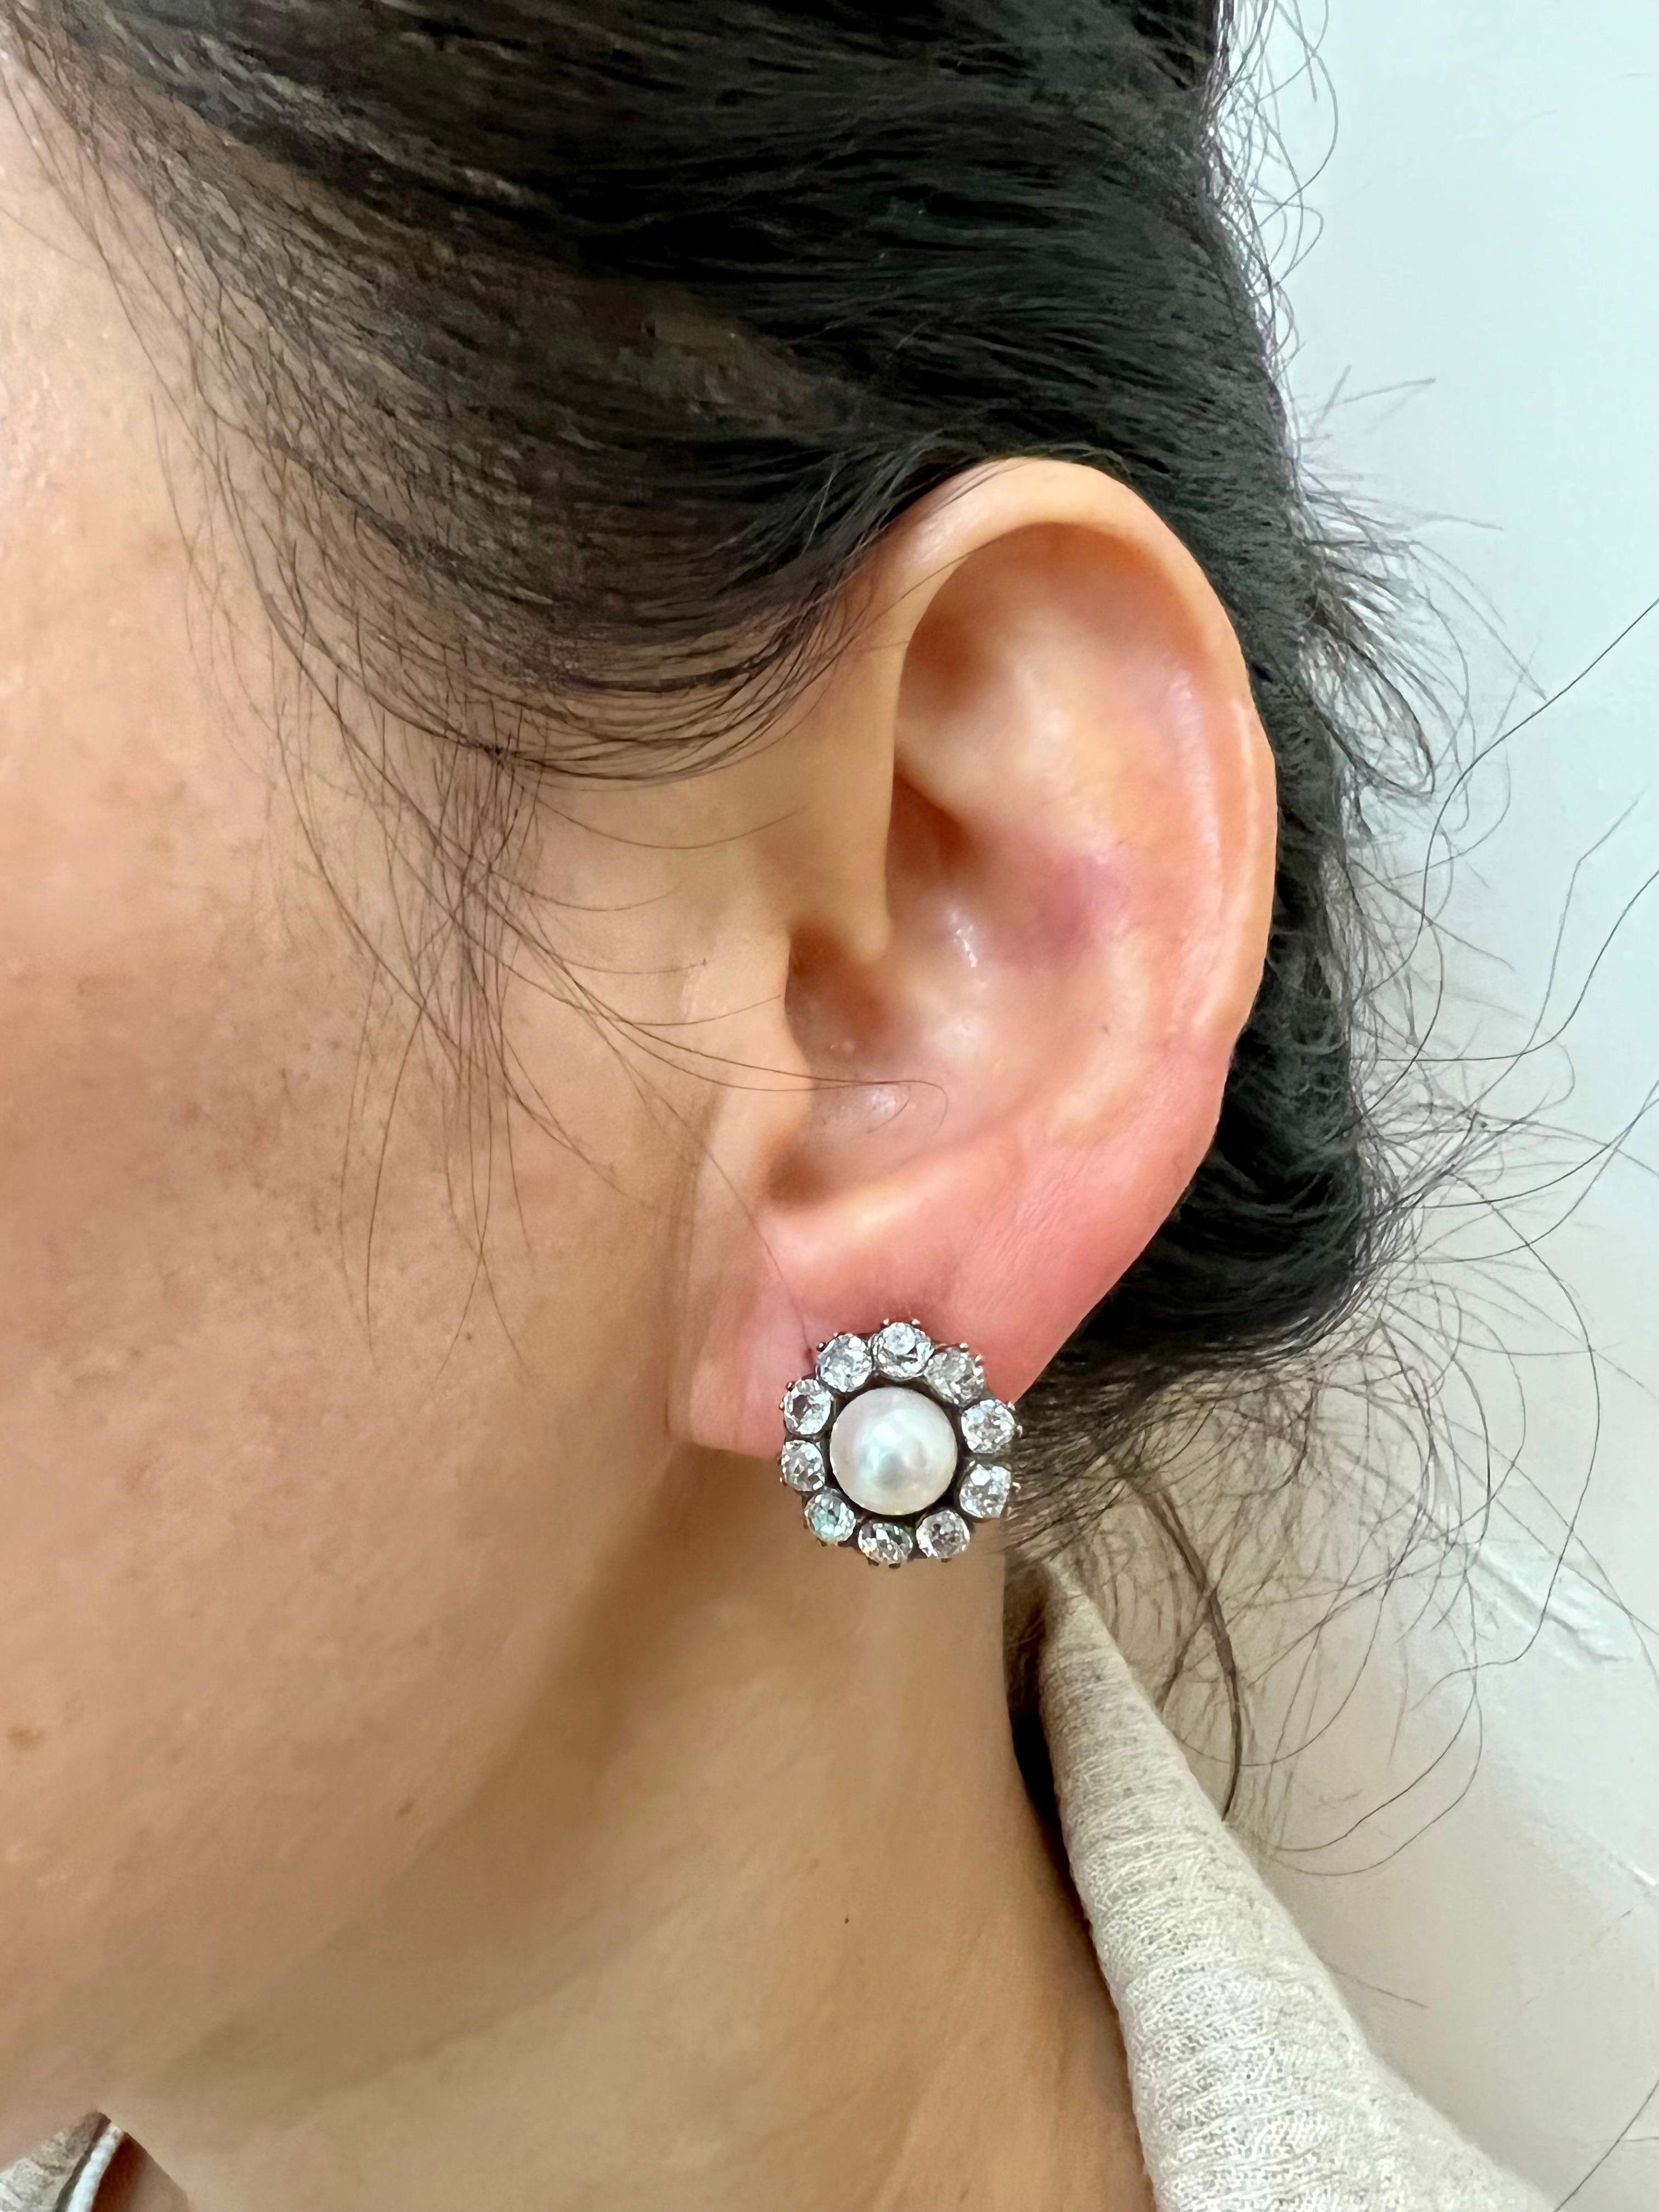 Please check out the HD video. These earrings are at least 100 years old! Still making a statement after all this time. In the center of each earring is one natural pearl surrounded by 10 old cut diamonds. The center pearls are about 7.2mm each. The